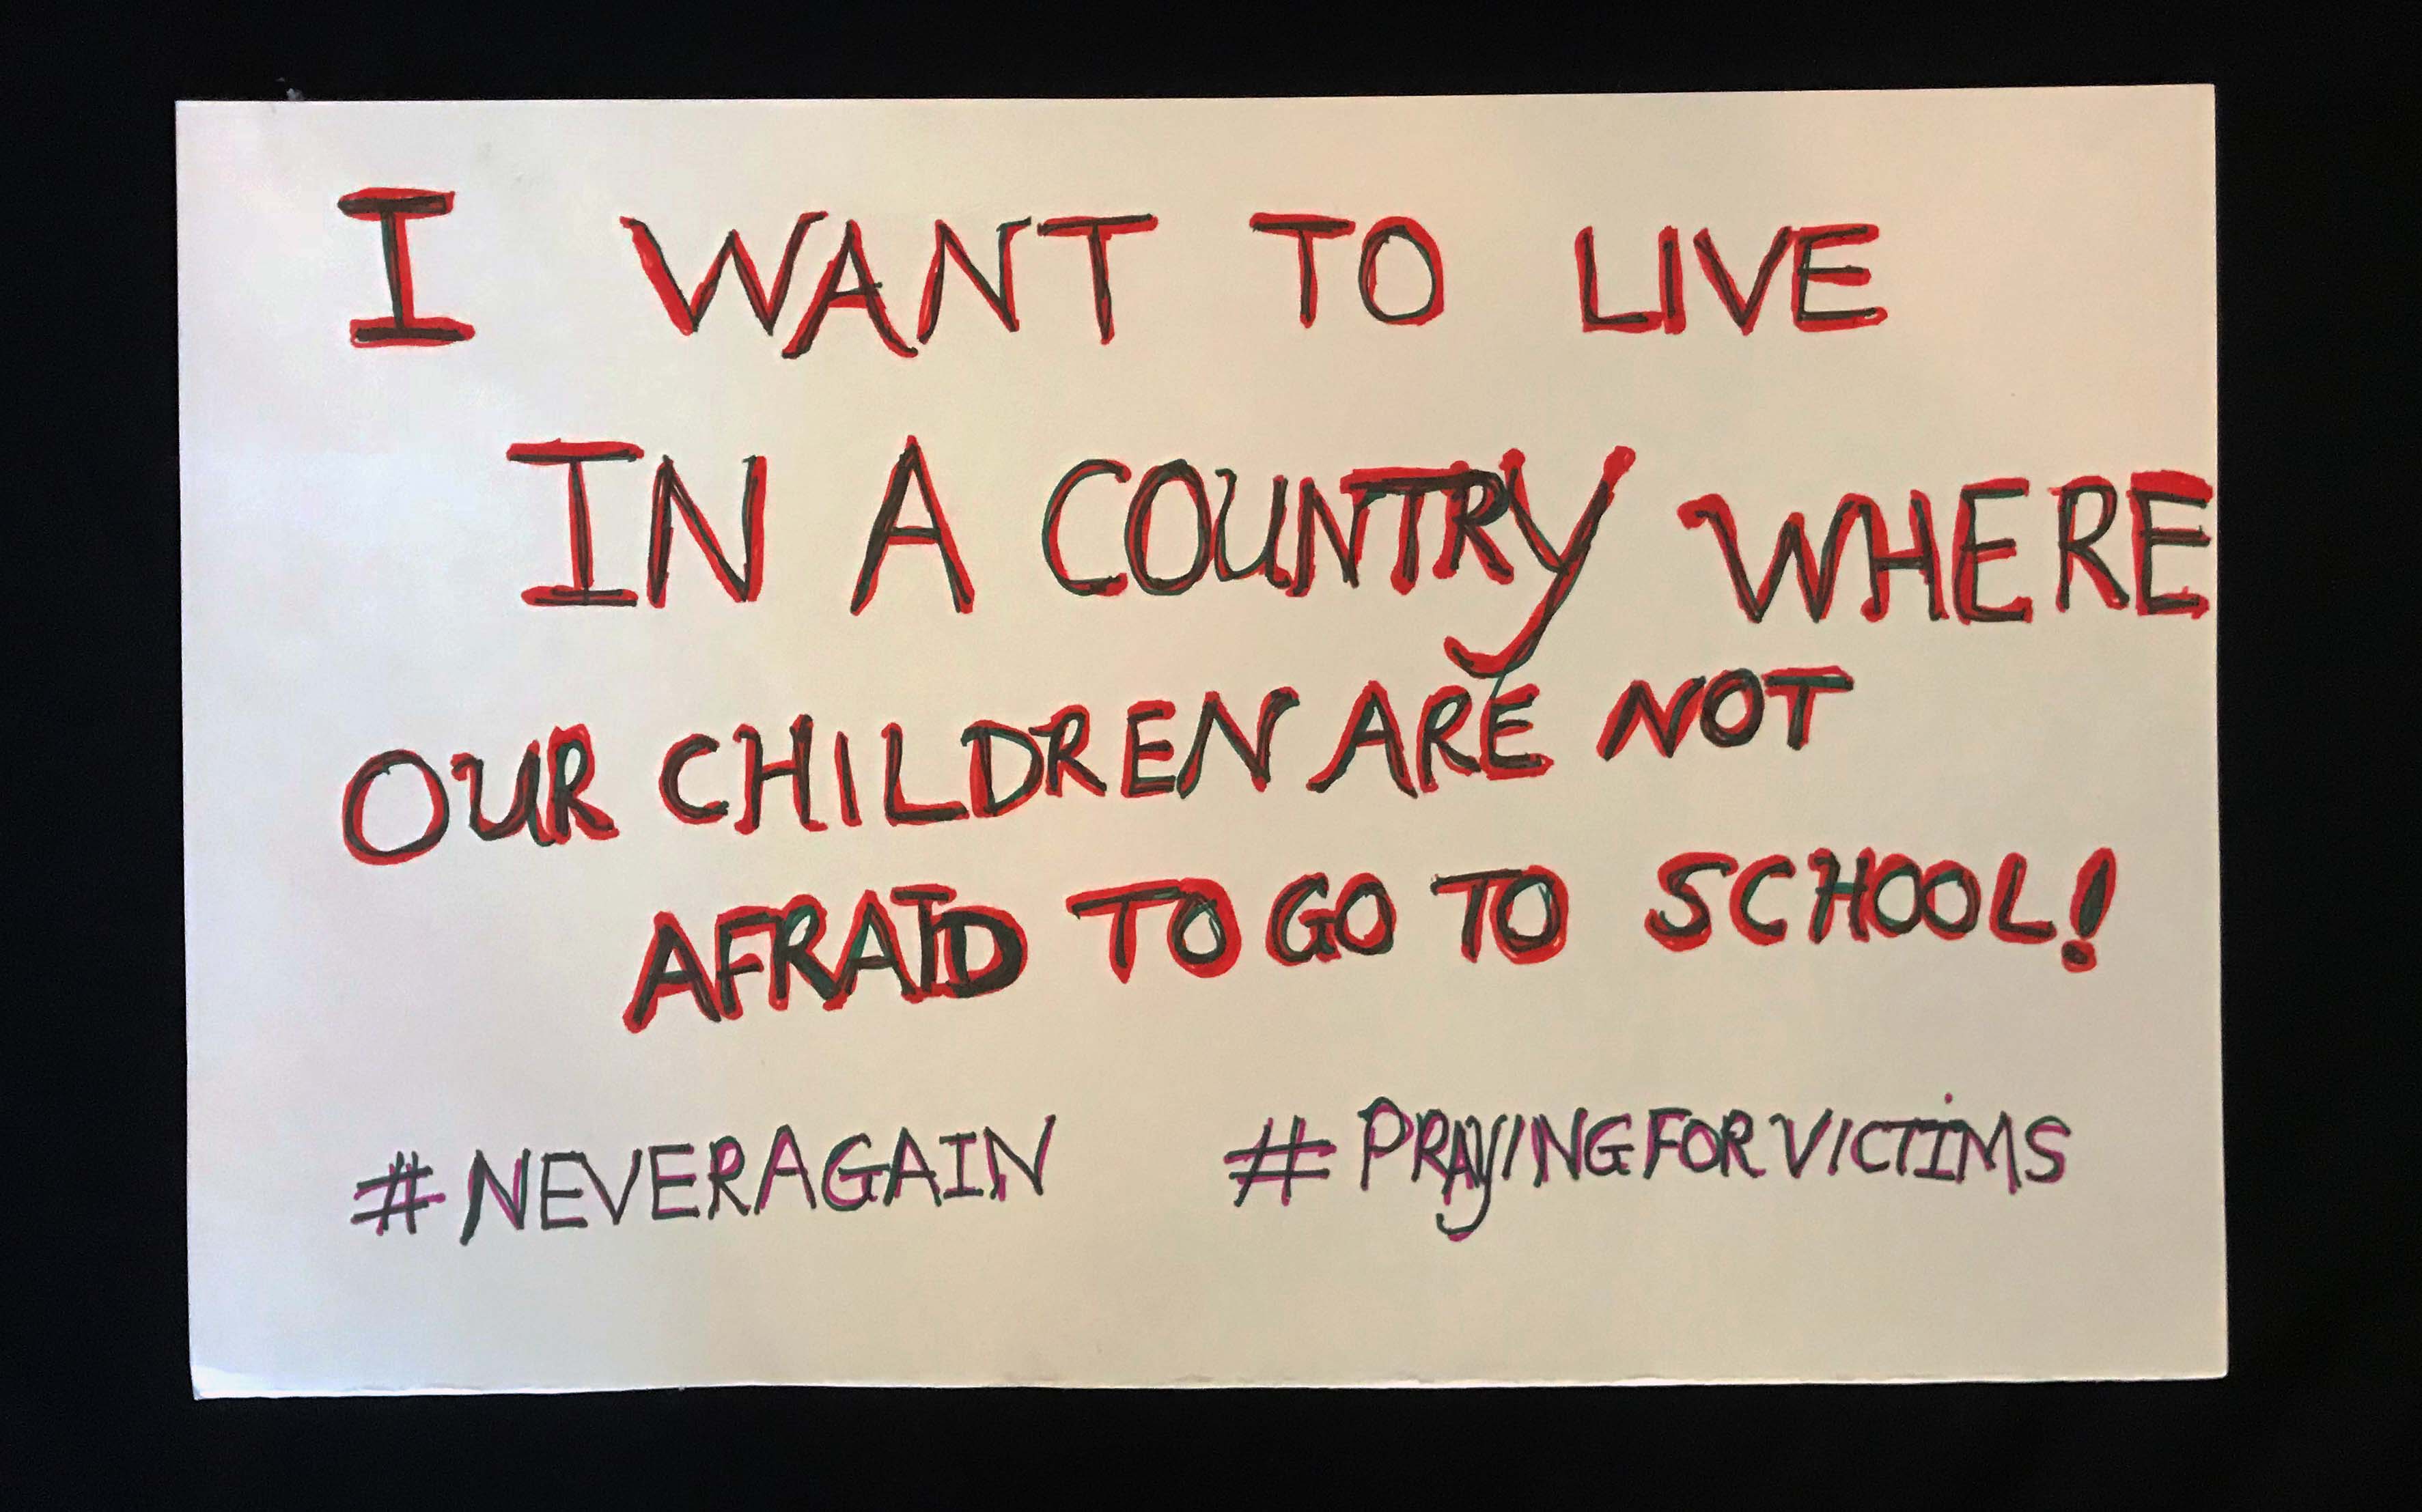 Charlotte March for Our Lives, 2018. Sign reads: "I want to live in a country where our children are not afraid to go to school. #neveragain #prayingforvictims"